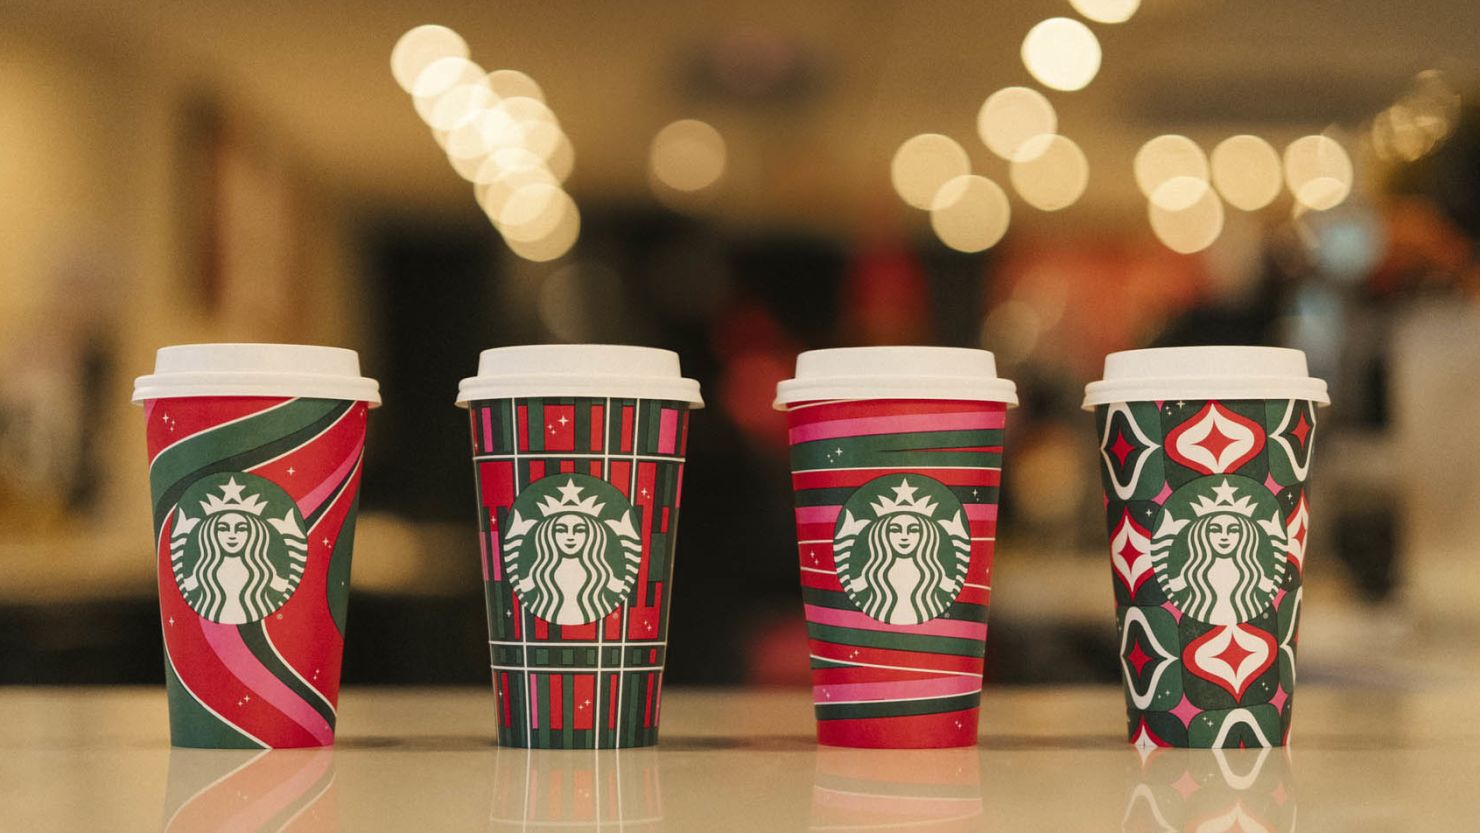 Starbucks releases another holiday cup. This time, it's red.